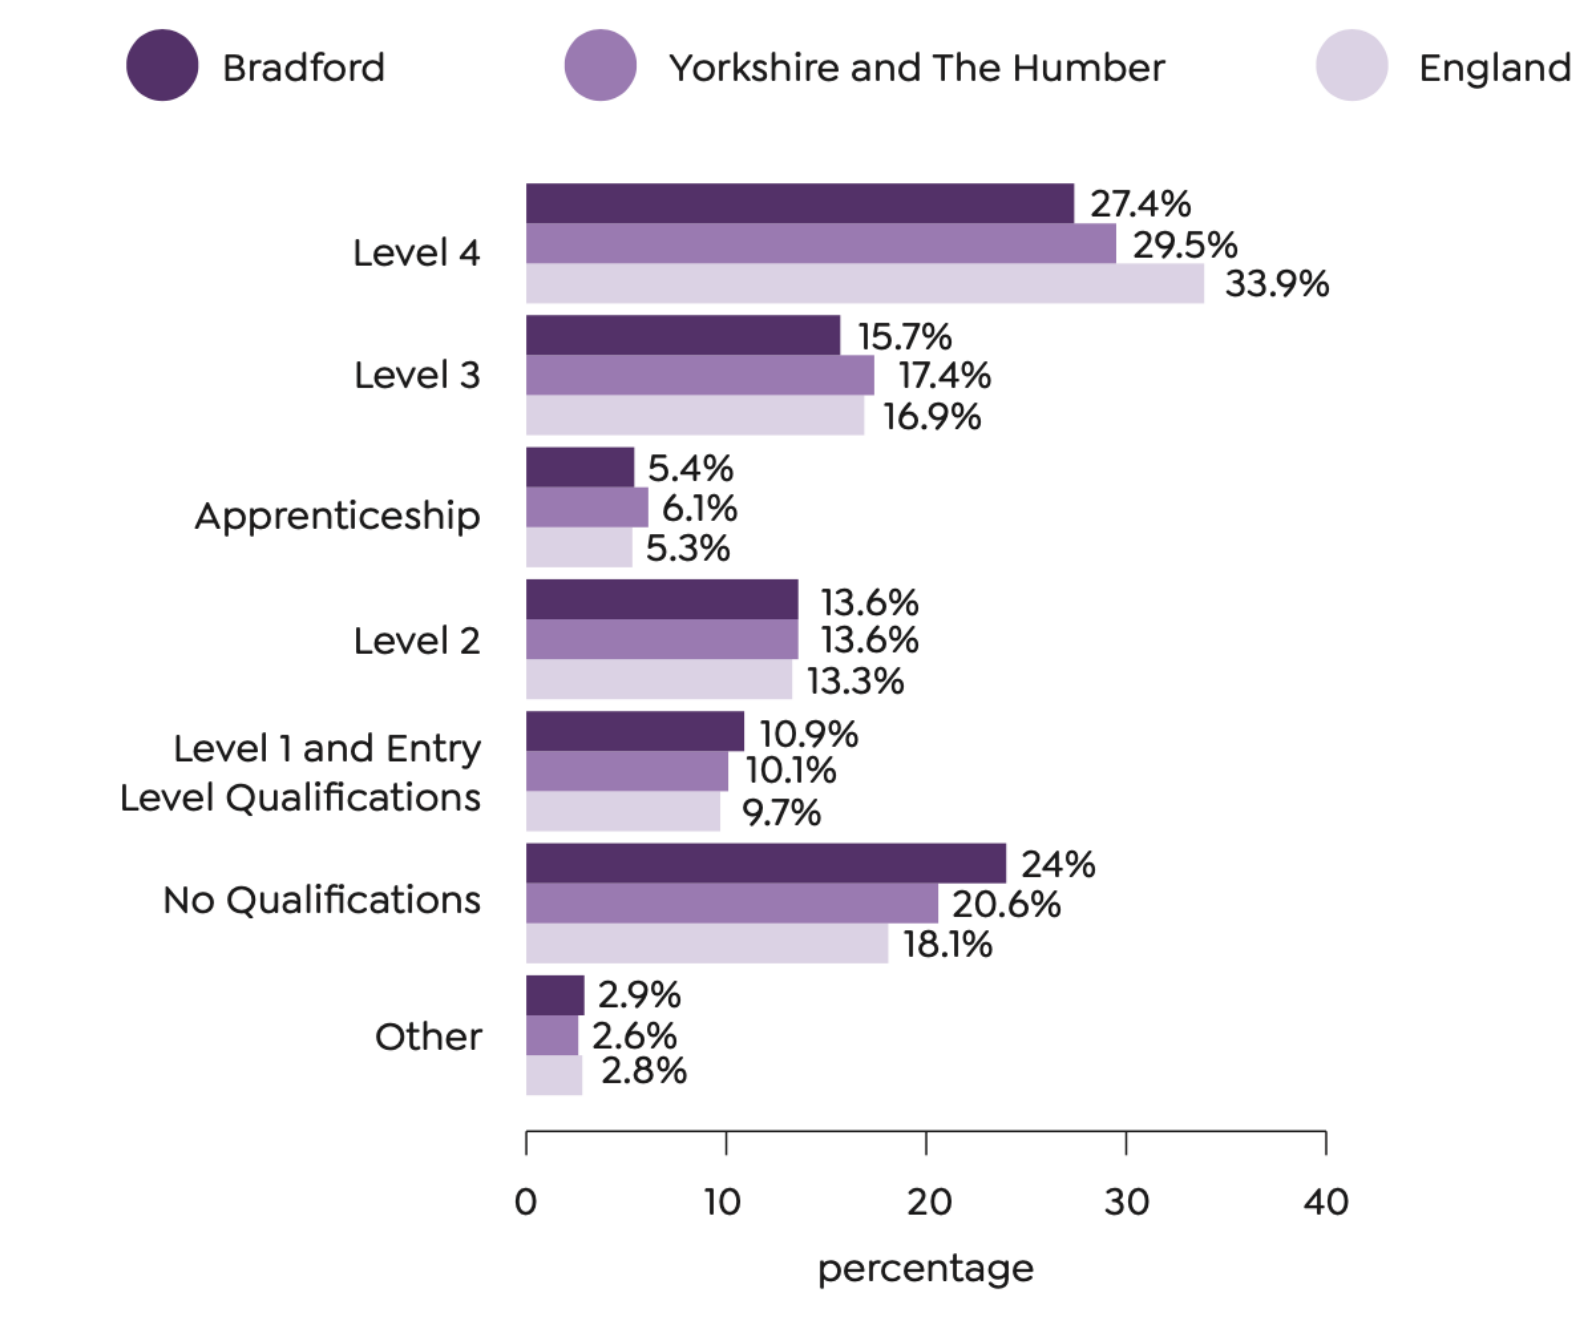 Bradford 2021 Level 4: 27.4% Level 3: 15.7% Apprenticeship: 5.4% Level 2: 13.6% Level 1 and Entry Level Qualifications: 10.9% No Qualifications: 24% Other: 2.9% Yorkshire and The Humber 2021 Level 4: 29.5% Level 3: 17.4% Apprenticeship: 6.1% Level 2: 13.6% Level 1 and Entry Level Qualifications: 10.1% No Qualifications: 20.6% Other: 2.6% England 2021 Level 4: 33.9% Level 3: 16.9% Apprenticeship: 5.3% Level 2: 13.3% Level 1 and Entry Level Qualifications: 9.7% No Qualifications: 18.1% Other: 2.8%